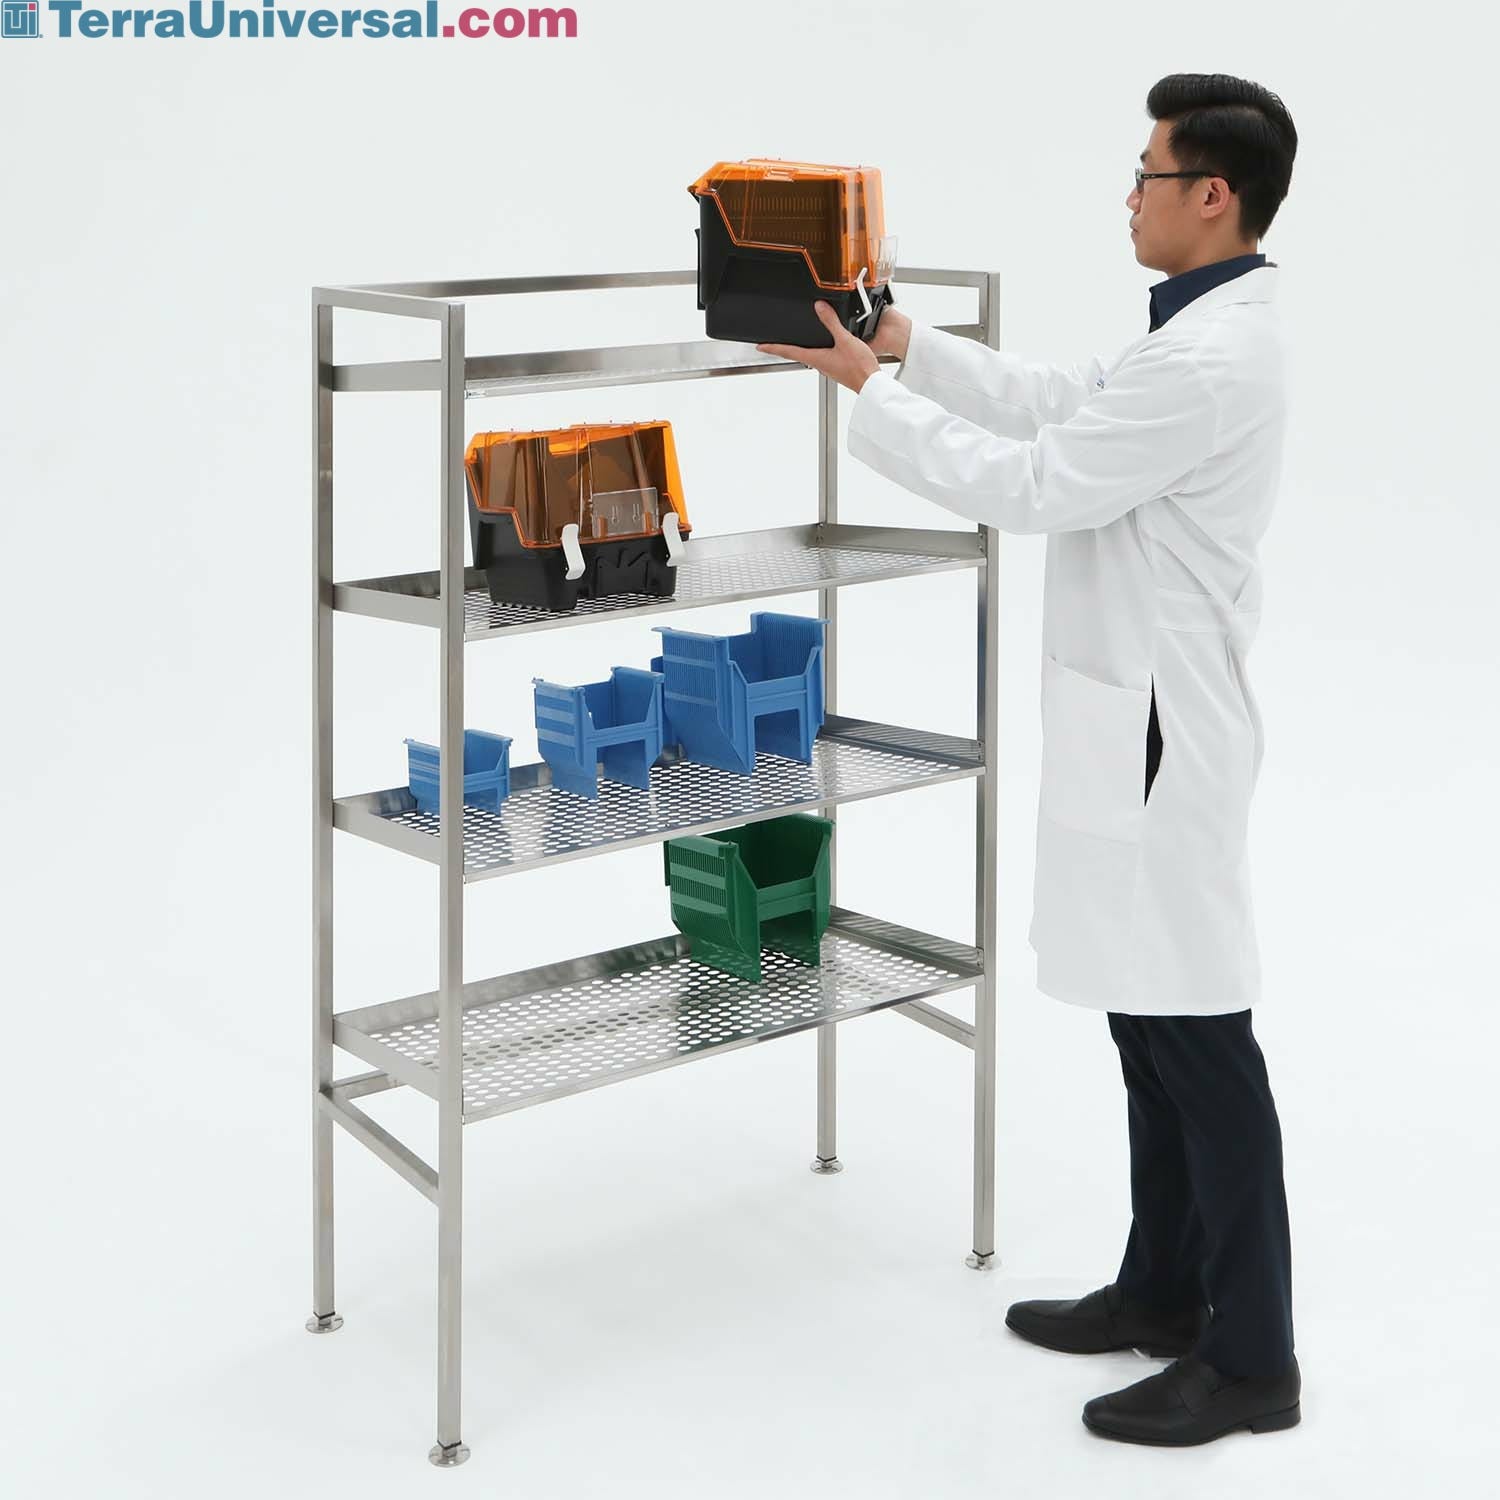 https://www.terrauniversal.com/media/asset-library/cache/original/watermark_c/1/S/t/Stainless-steel-wip-storage-rack-for-semiconductor-wafer-boxes.jpg